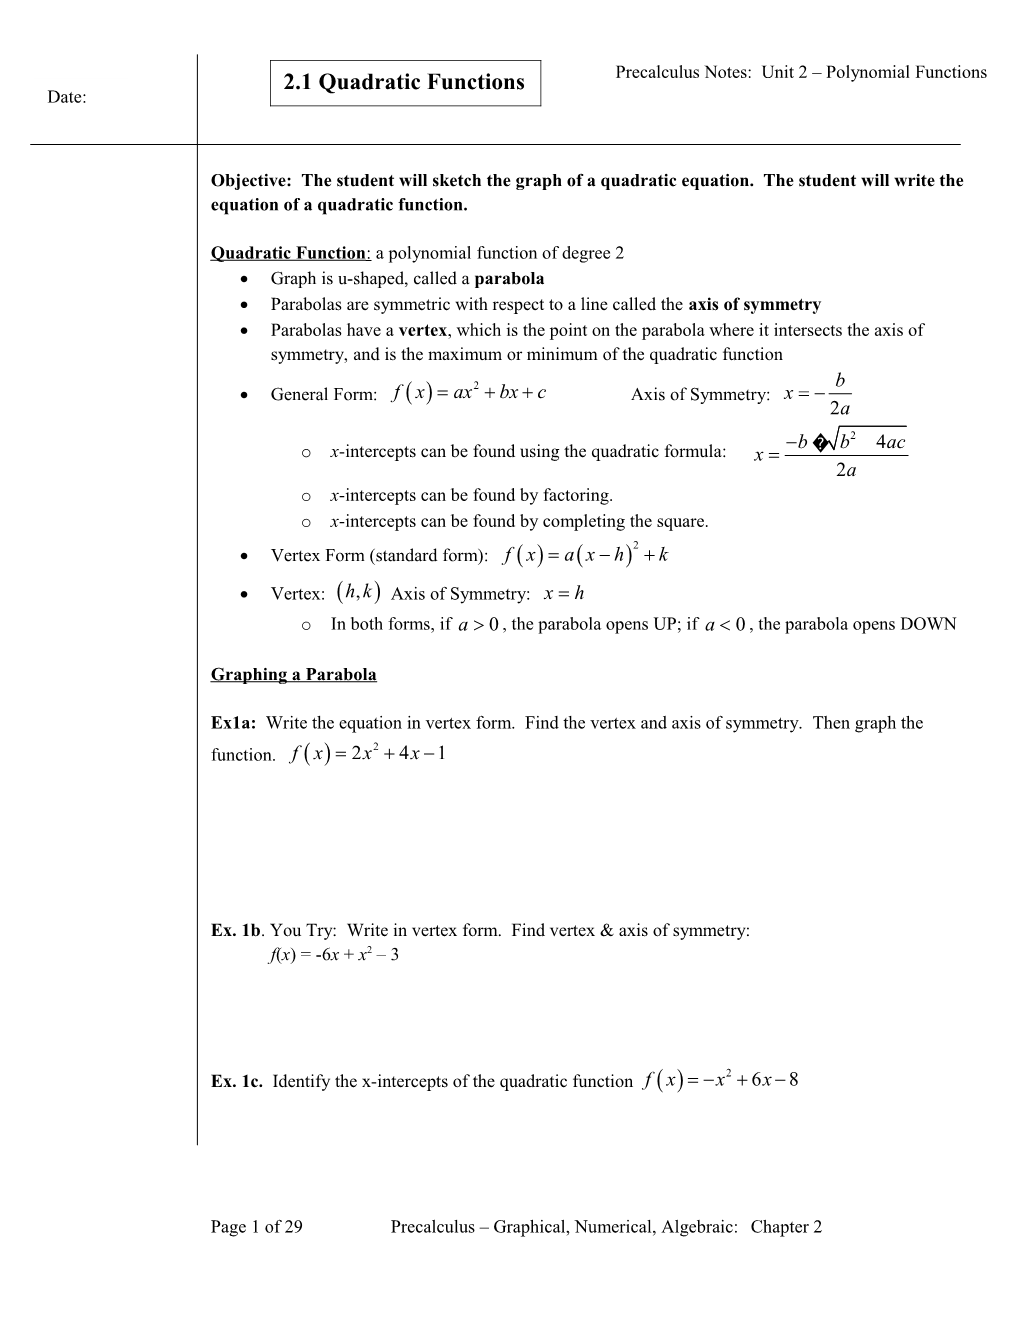 Precalculus Notes: Unit 2 Polynomial Functions